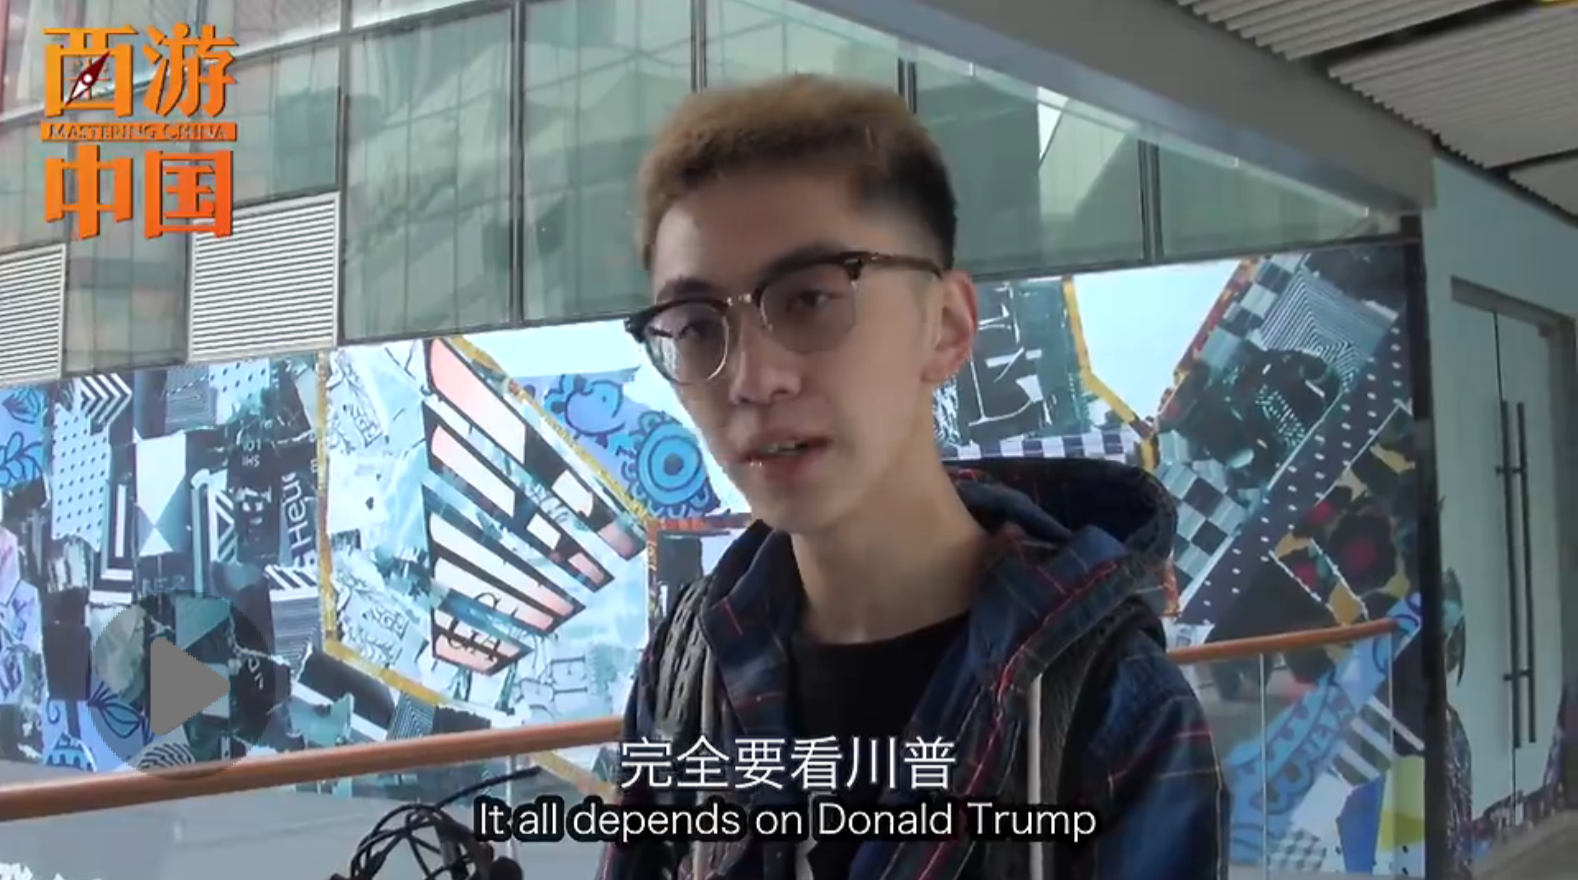 A screenshot of the Global Times' "Mastering China" video featuring reactions to Ivanka Trump's brand coming to China.